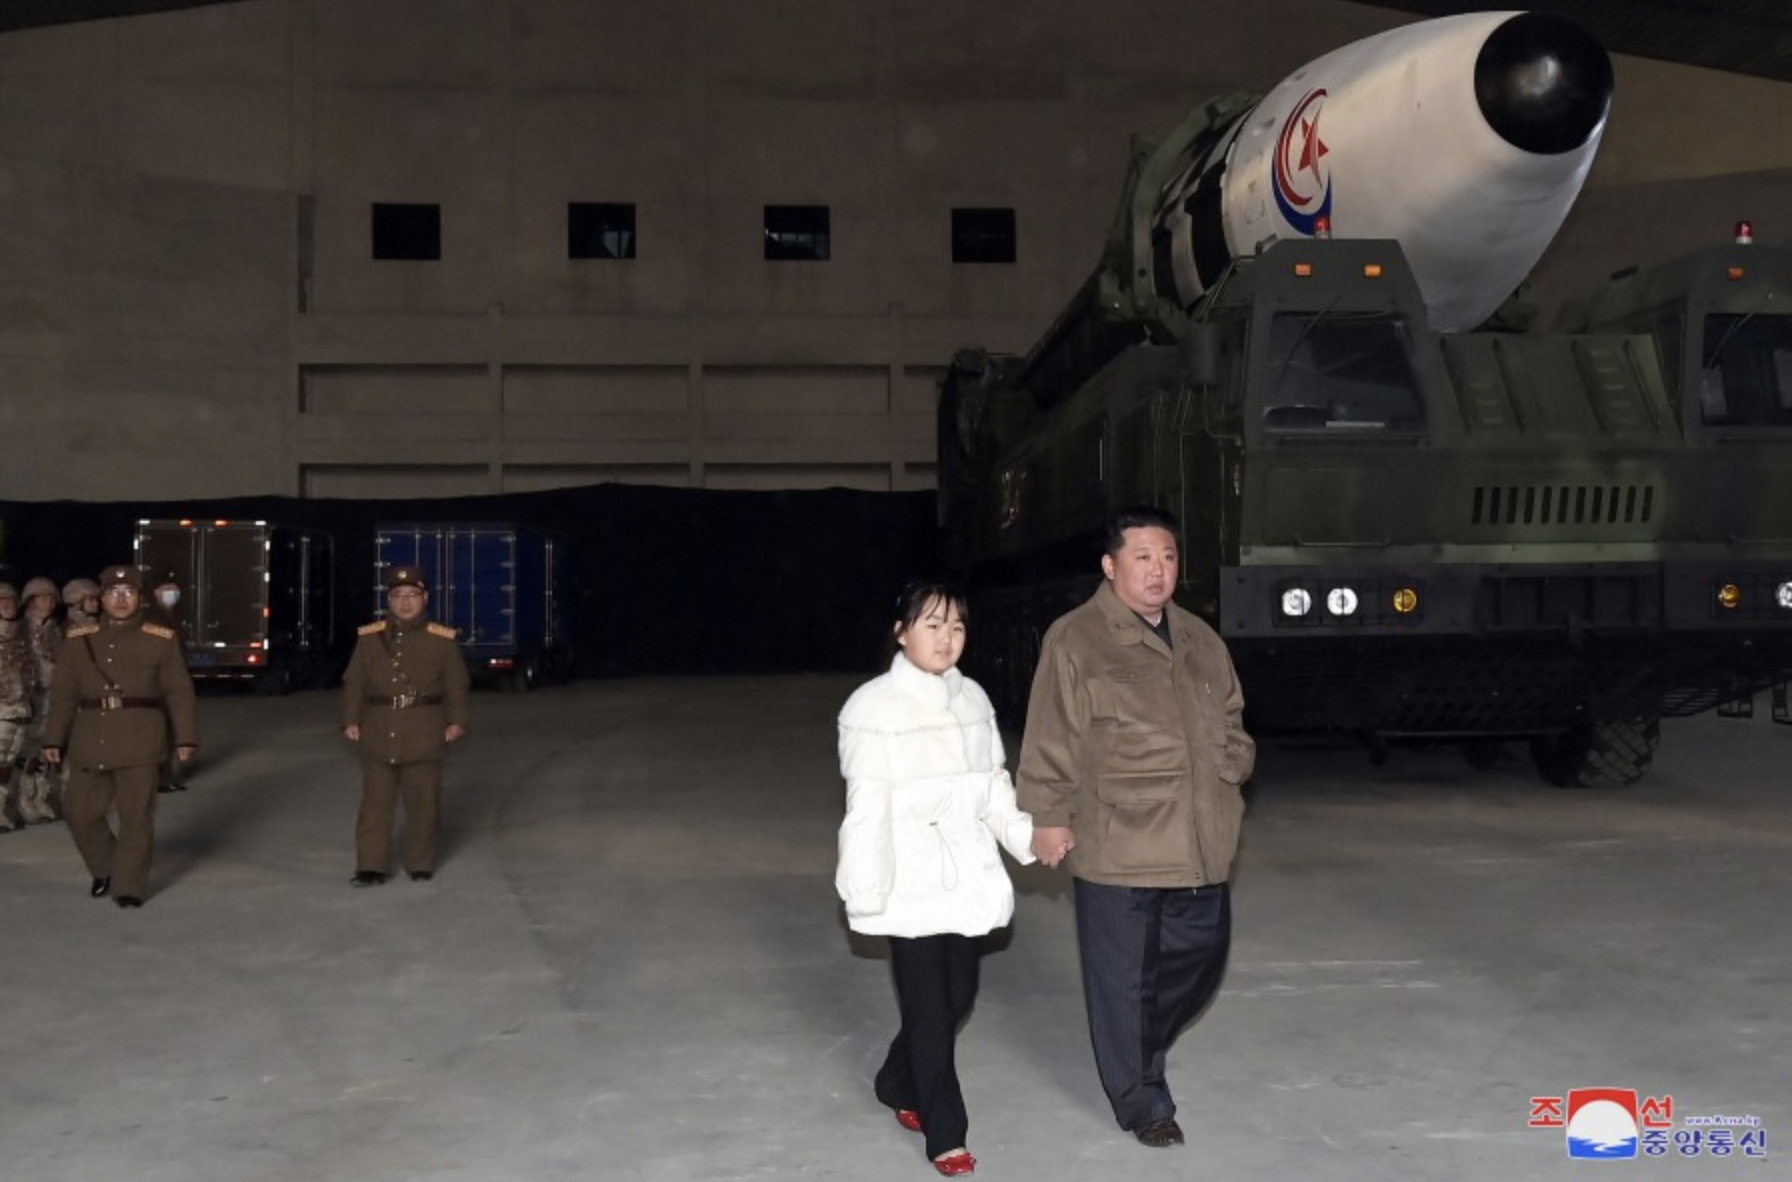 Kim and his daughter walk past the rocket.